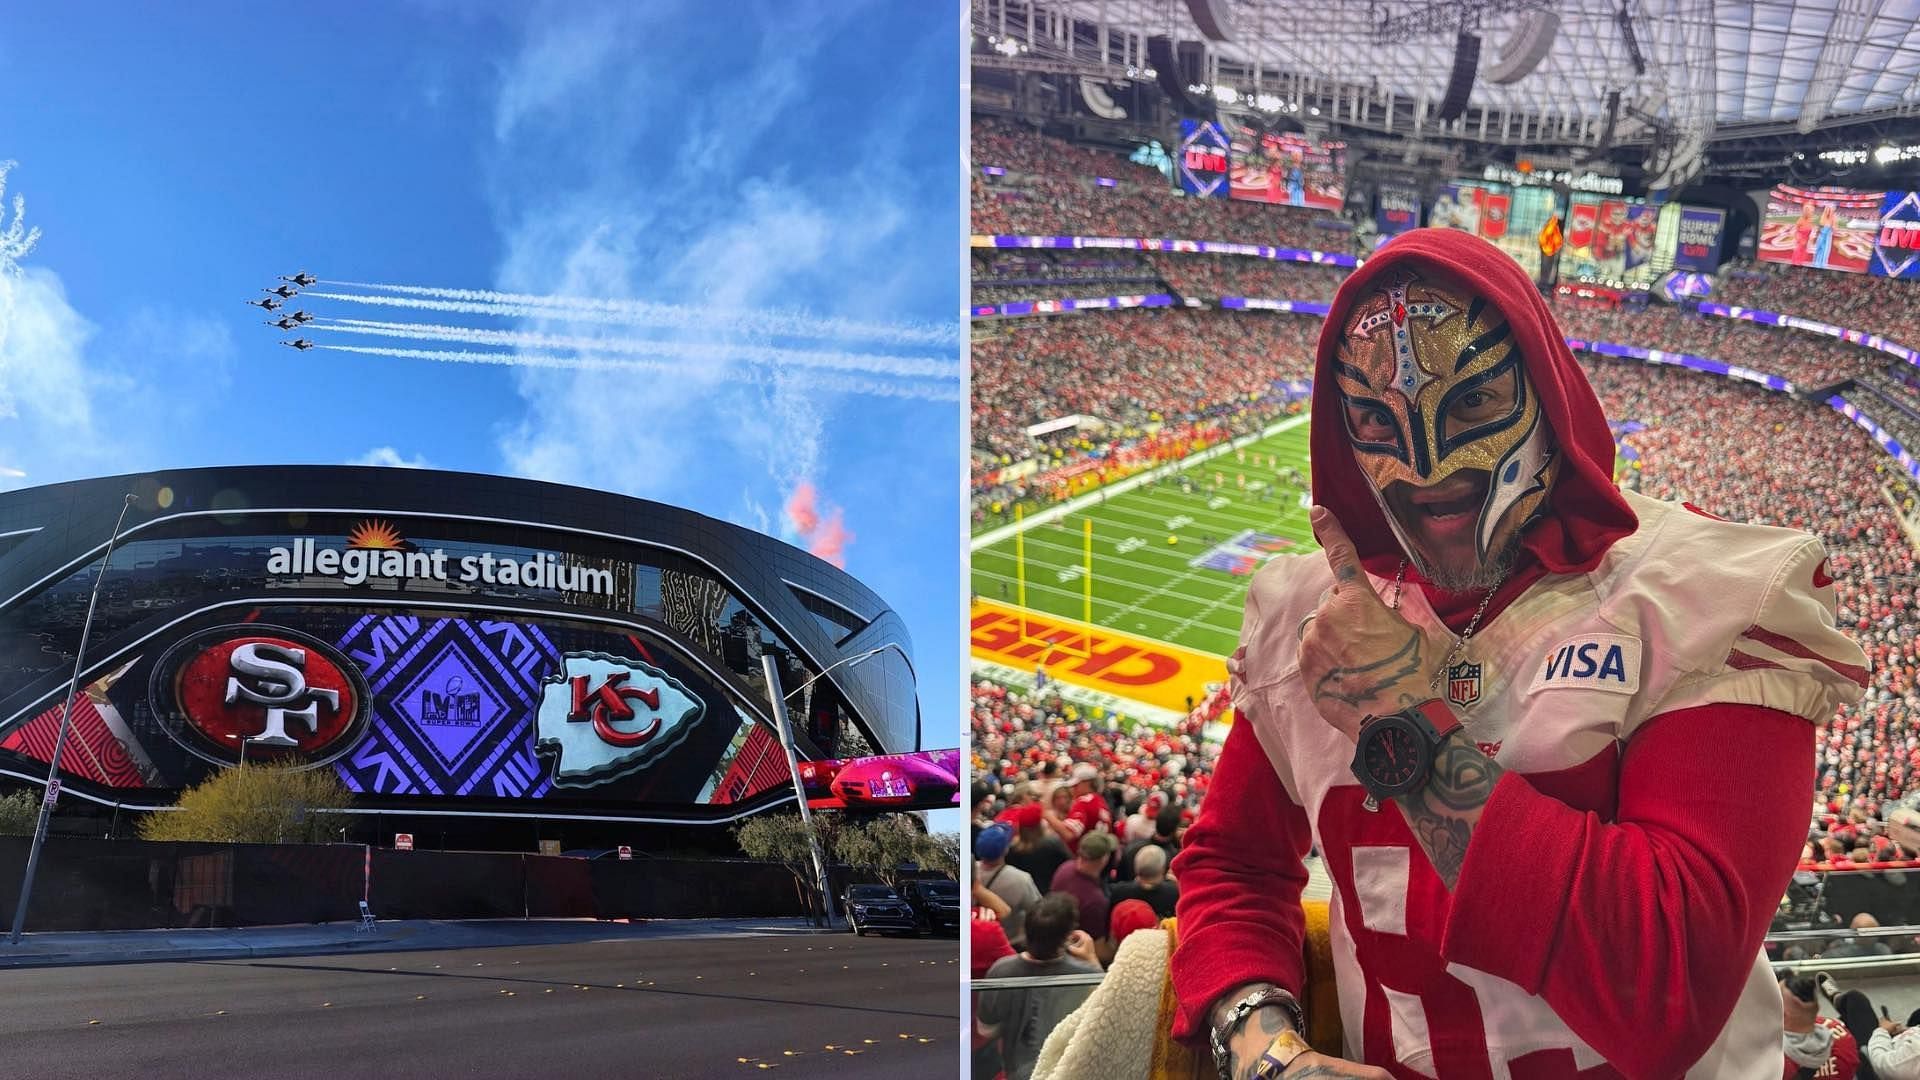 Some WWE Superstars were in attendance for the NFL